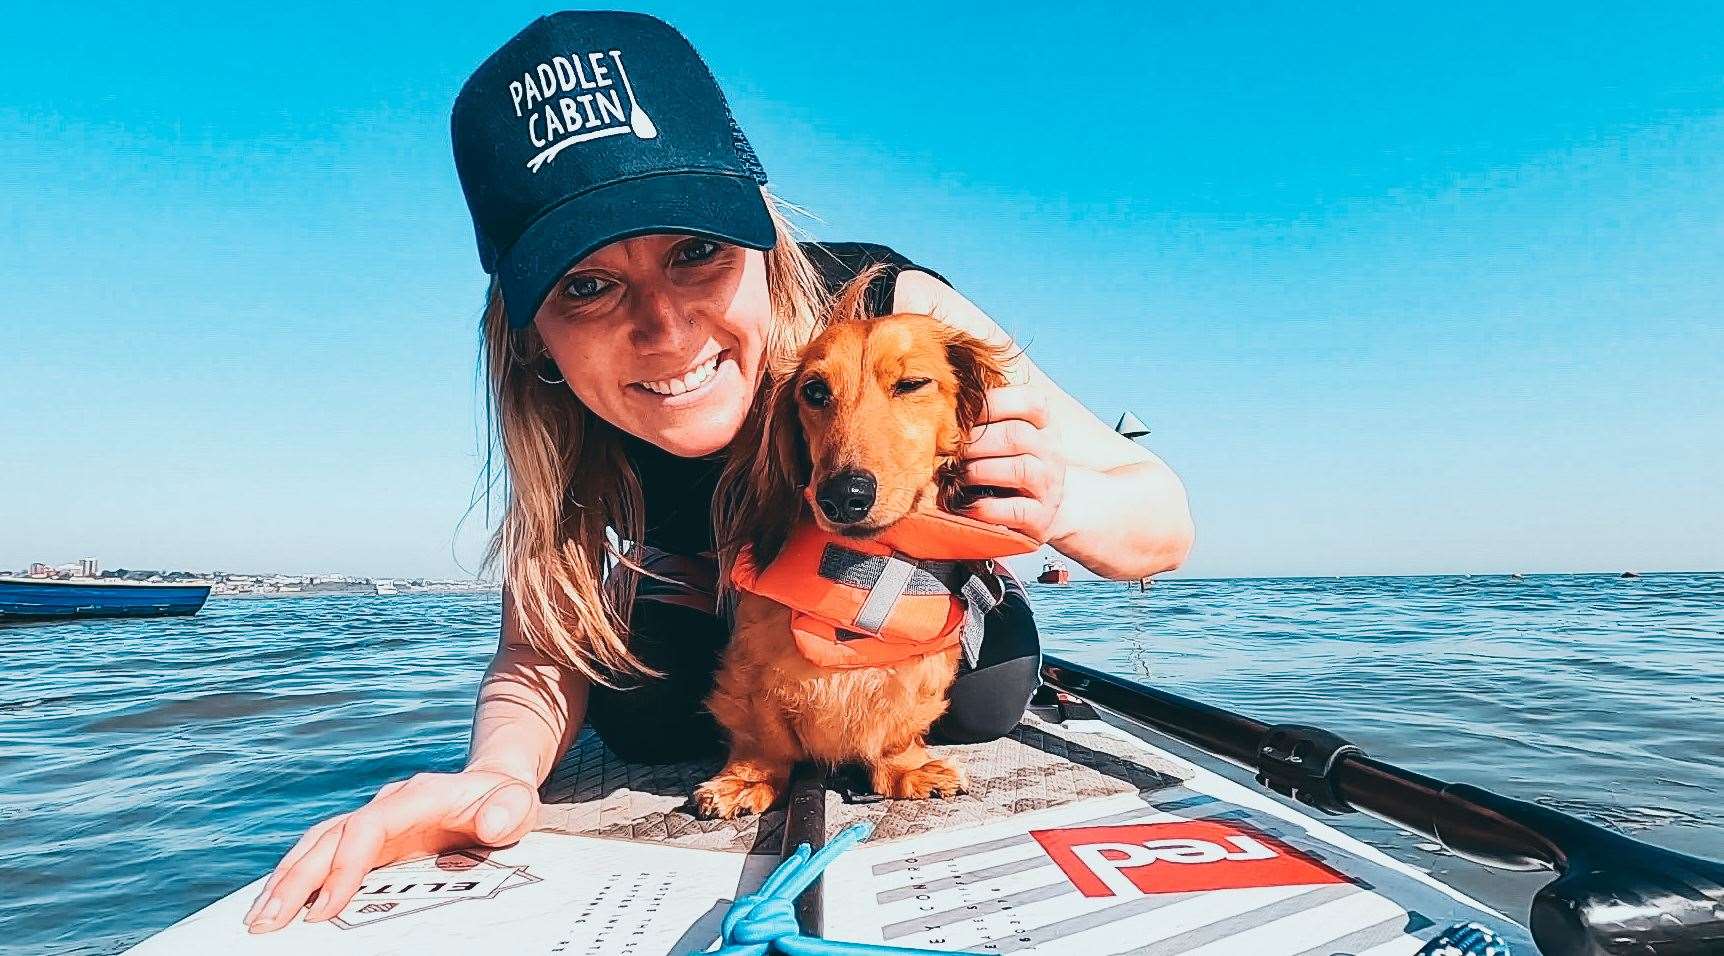 There are classes you can take your pup to. Picture: Paddle Cabin